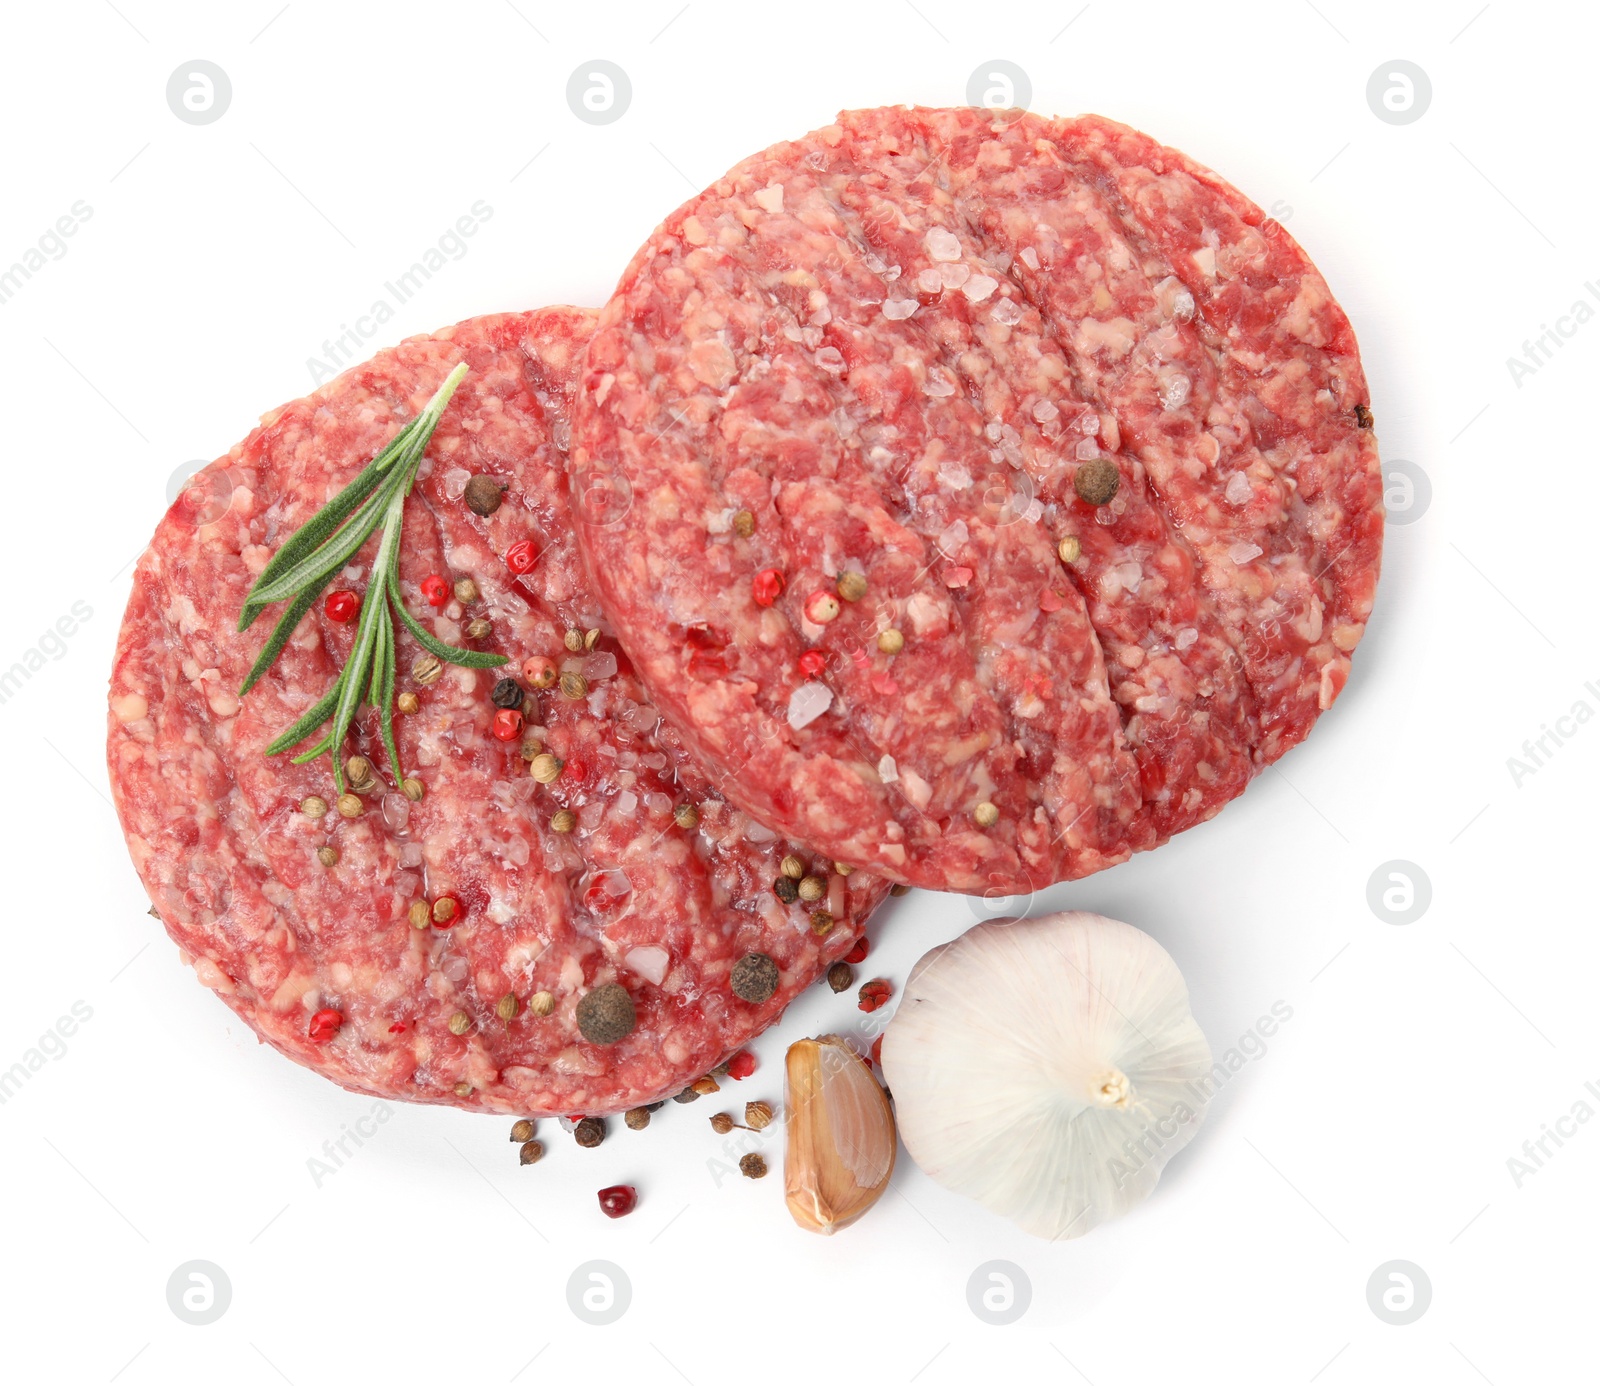 Photo of Raw hamburger patties with rosemary, garlic and spices on white background, top view